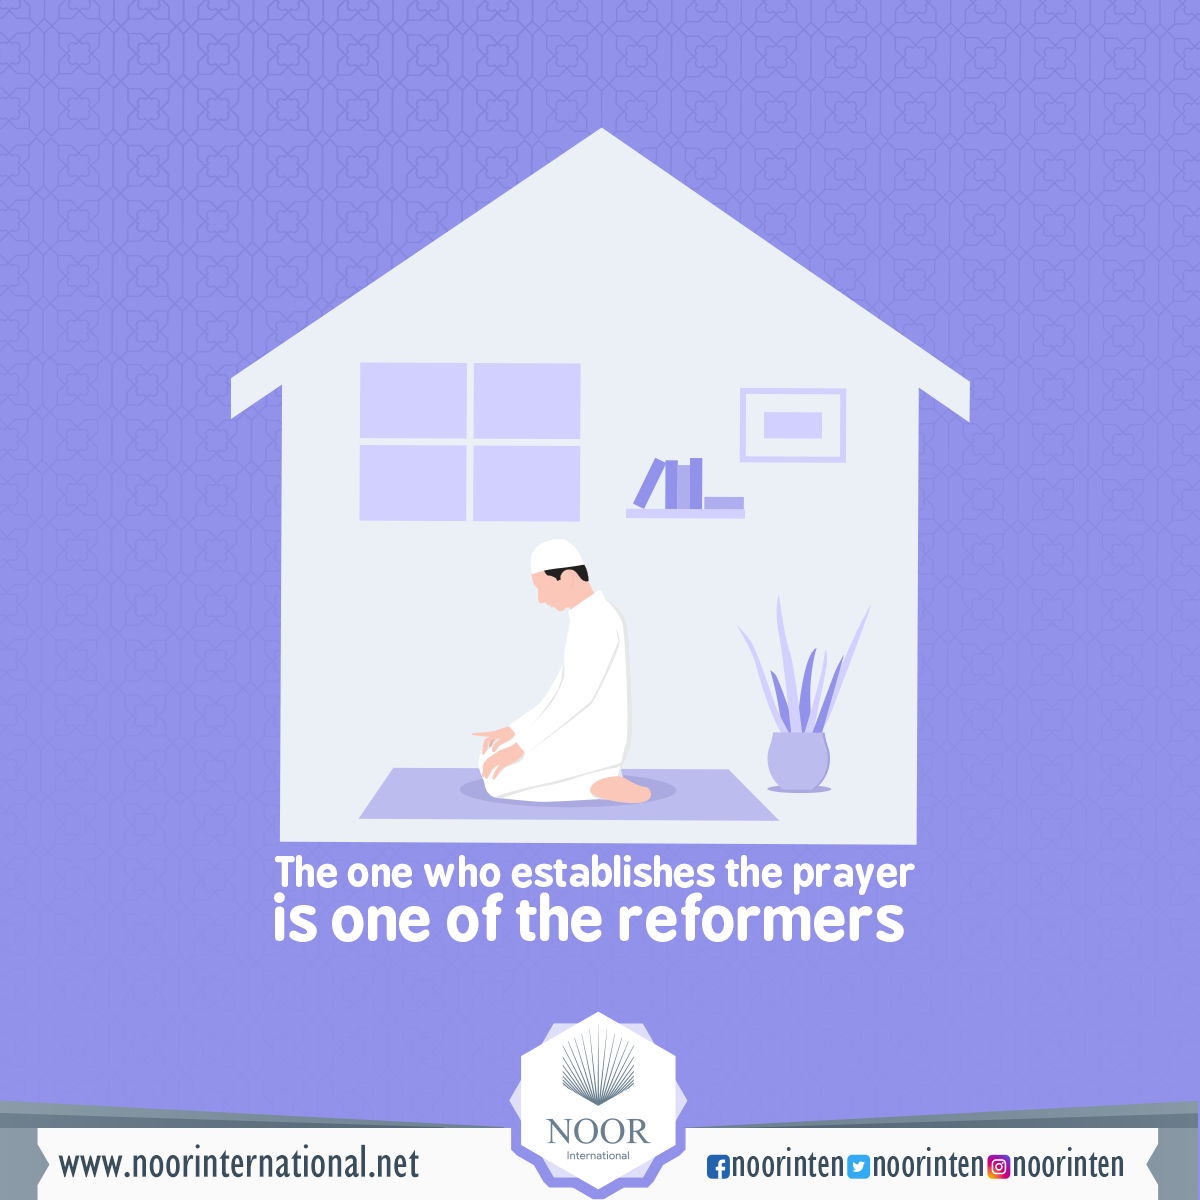 The one who establishes the prayer is one of the reformers